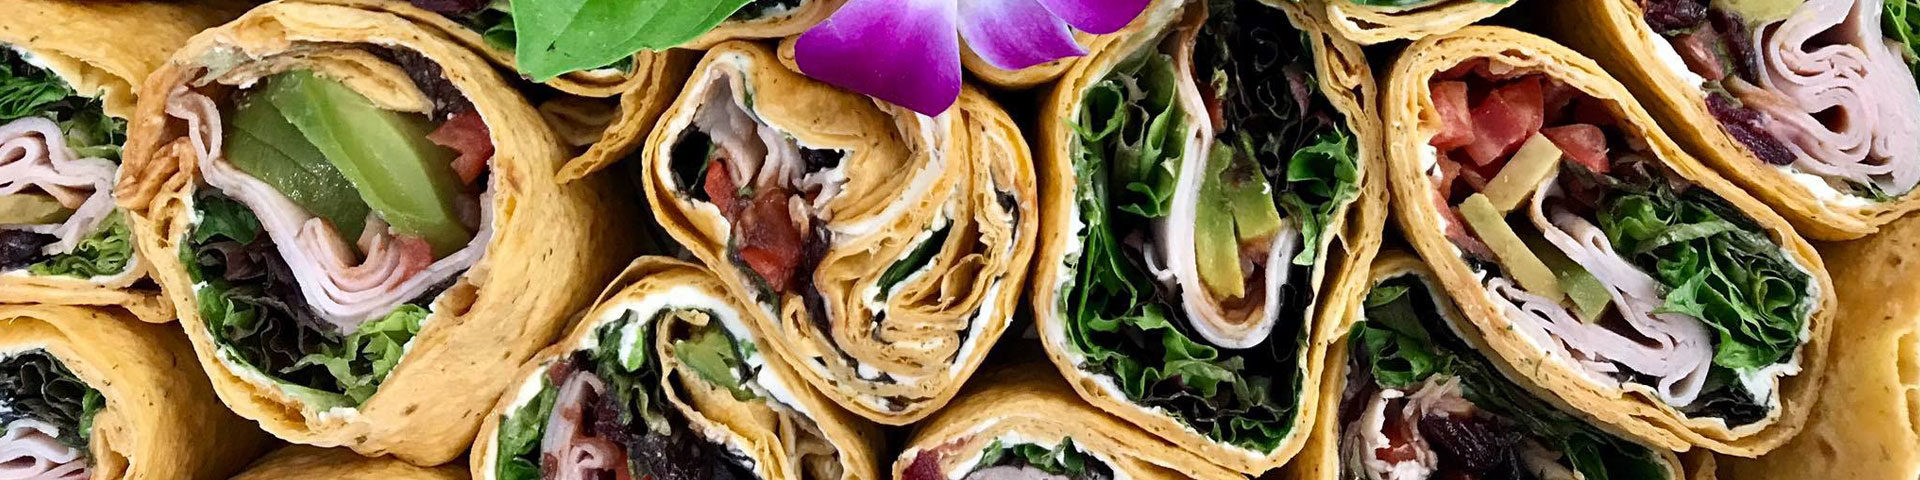 wraps by Normandy Catering